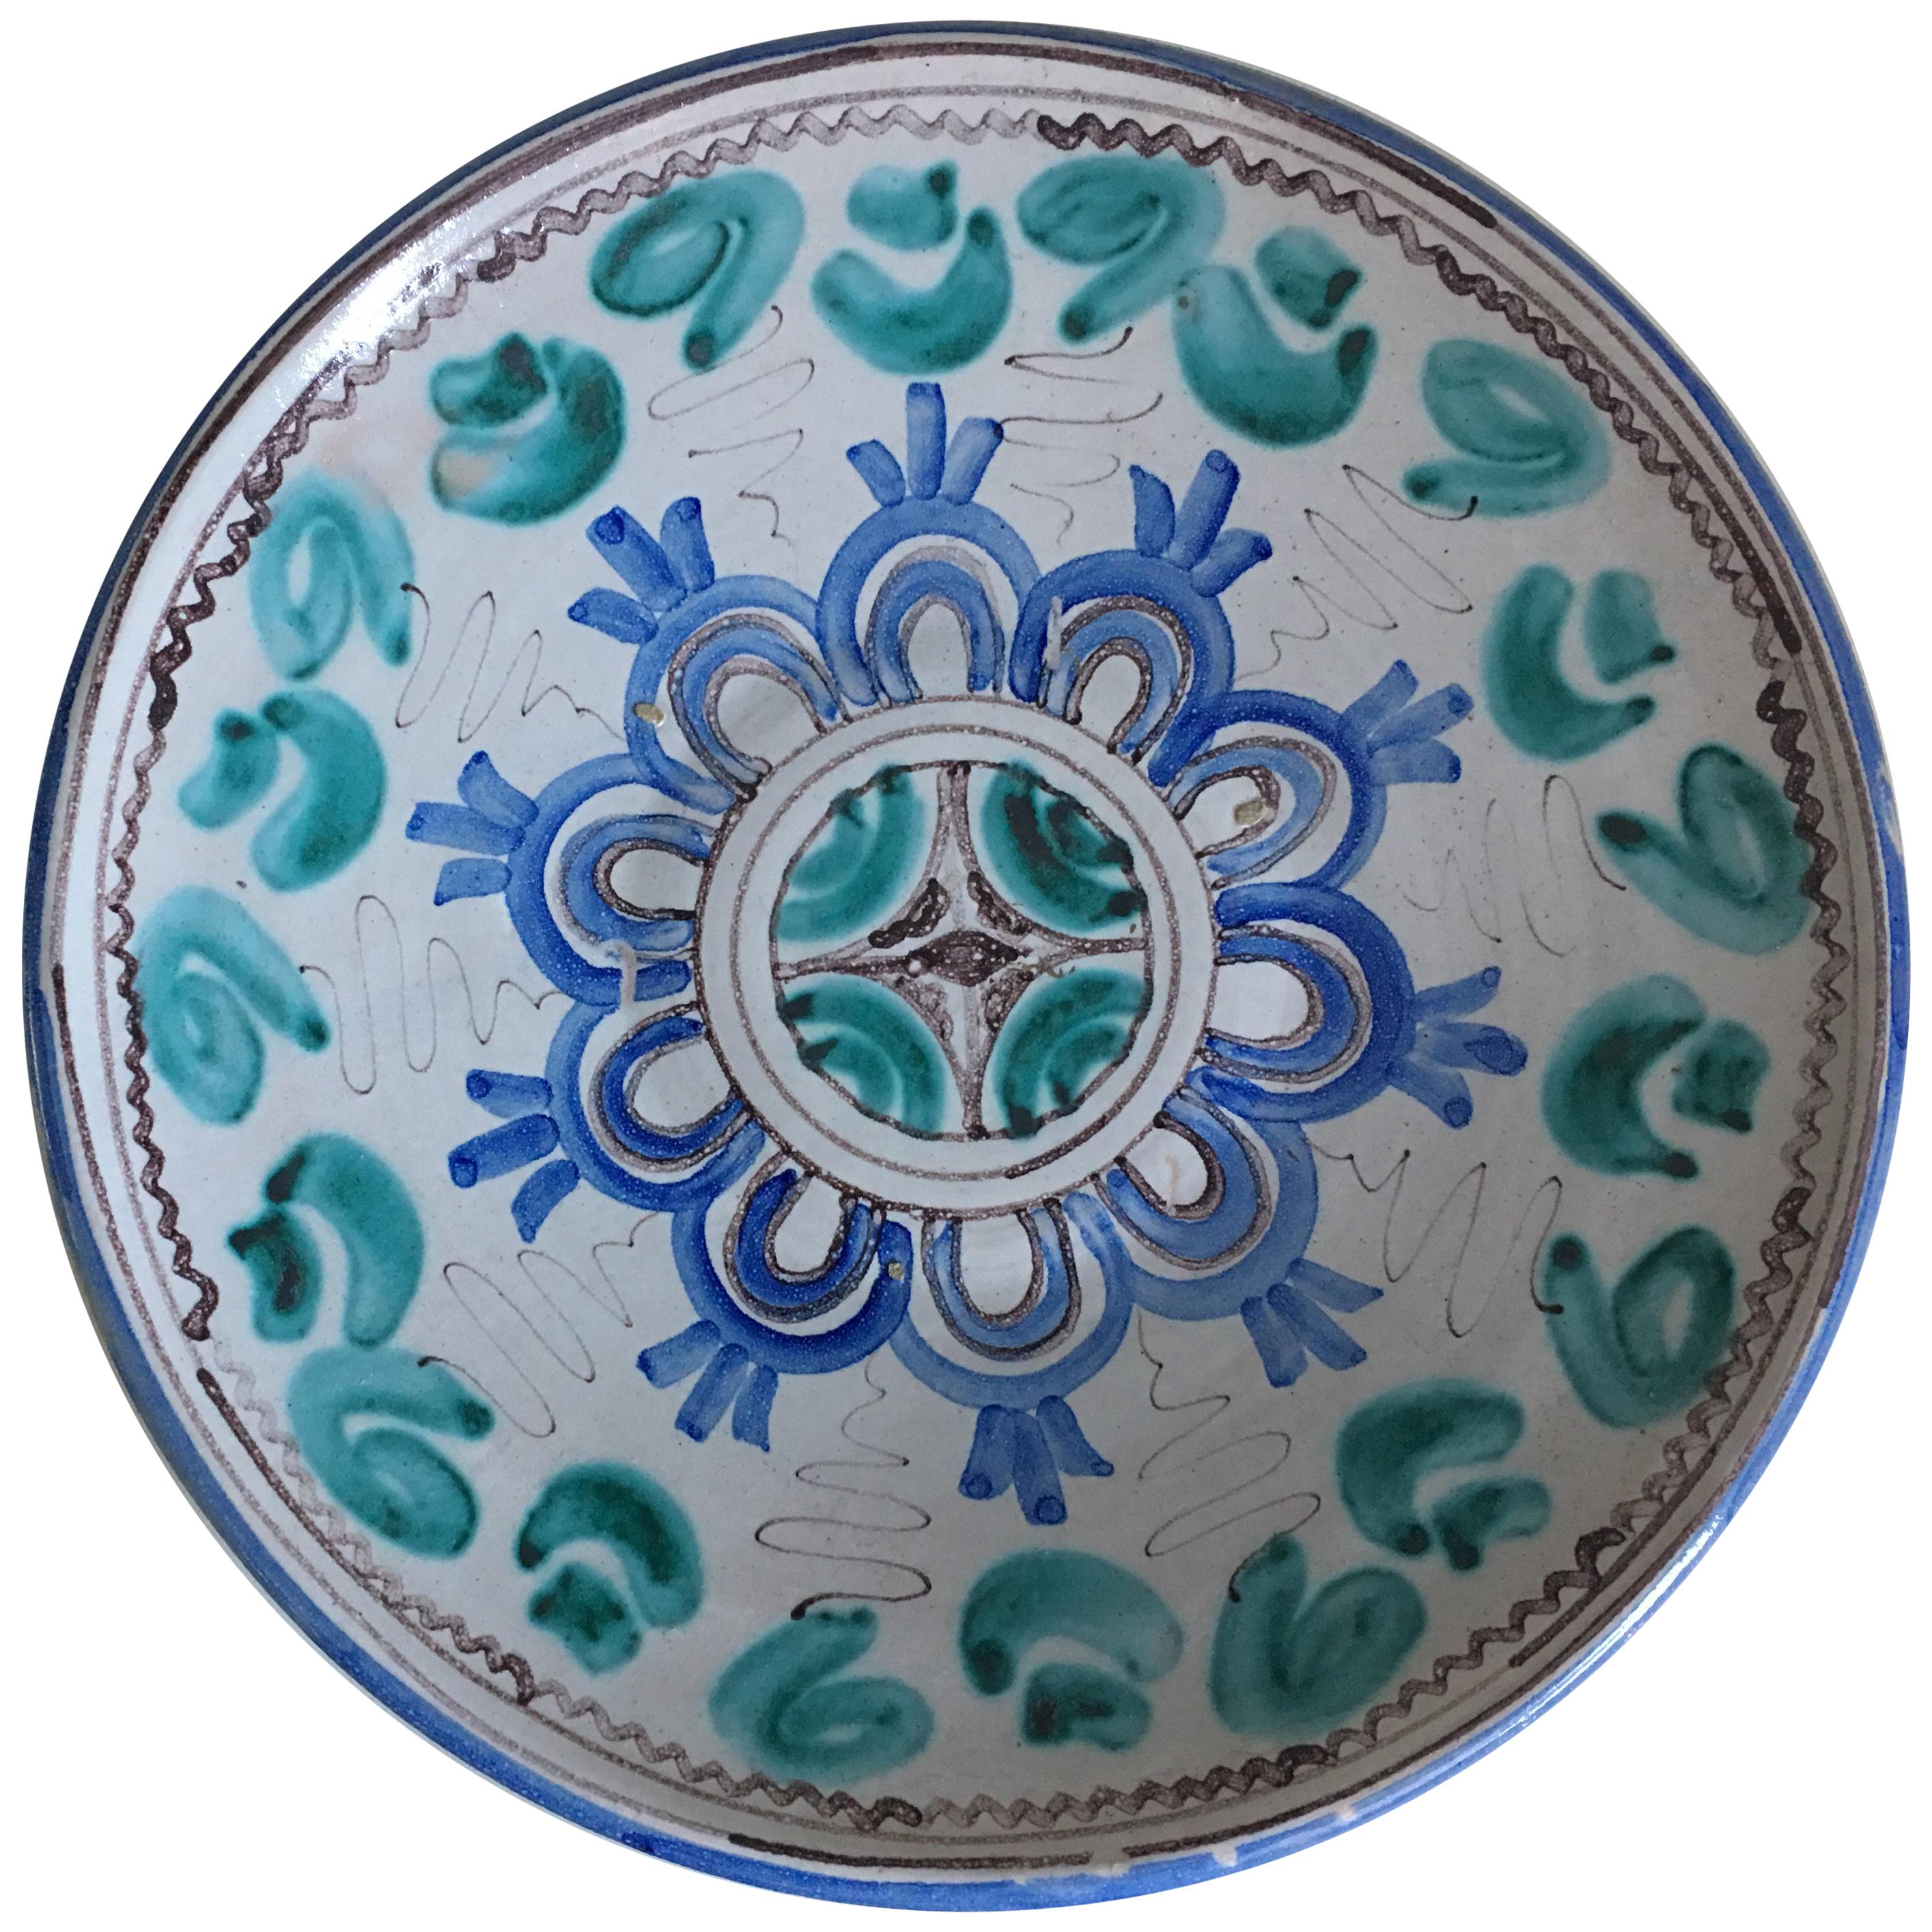 Midcentury Blue and Green Ceramic Dish or Plate with Geometrical Motifs